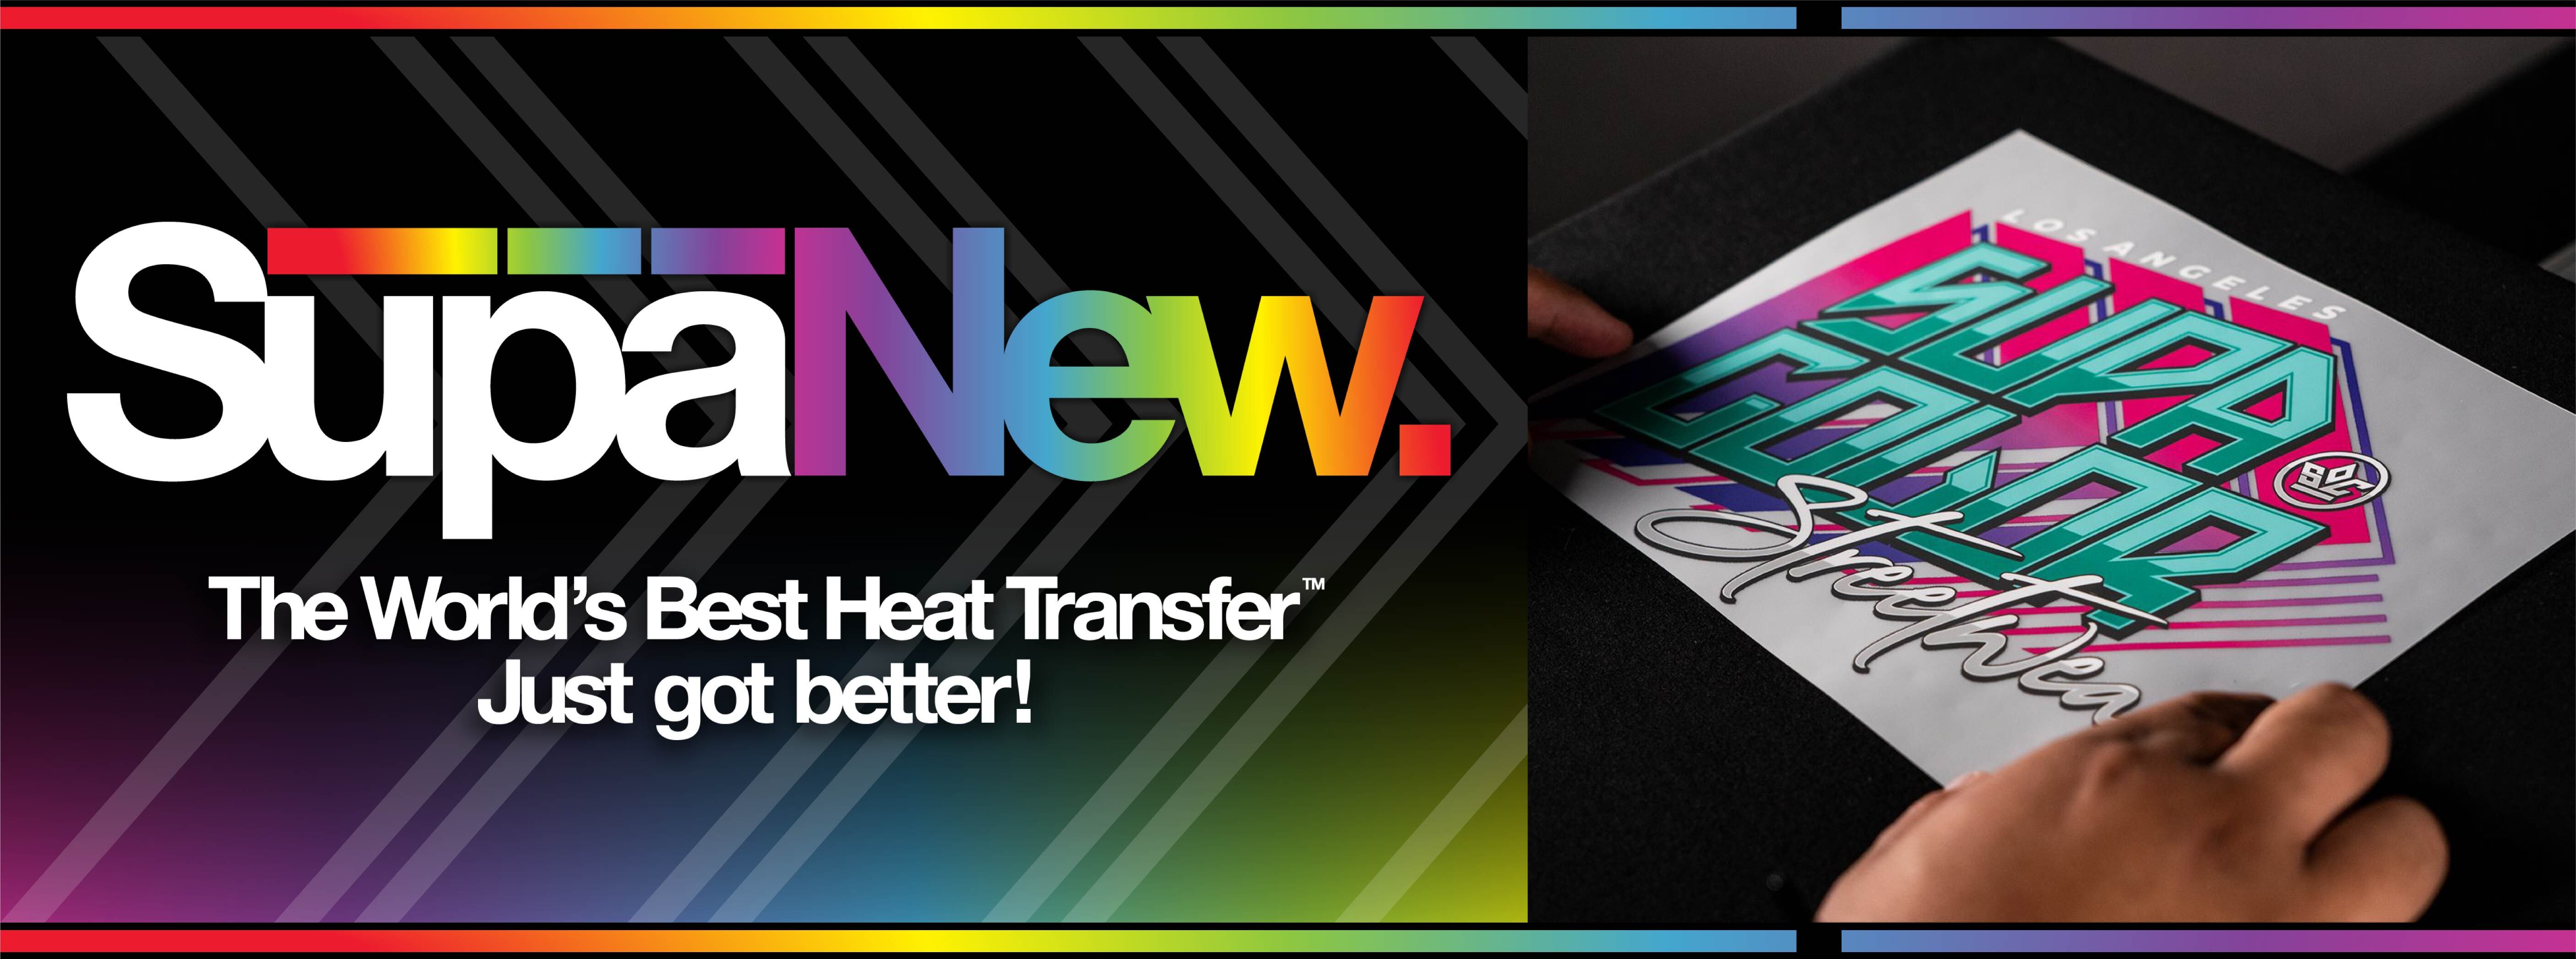 Digital heat transfer foil with a metallized effect, by Preco - Product  Info - Preco Corporation